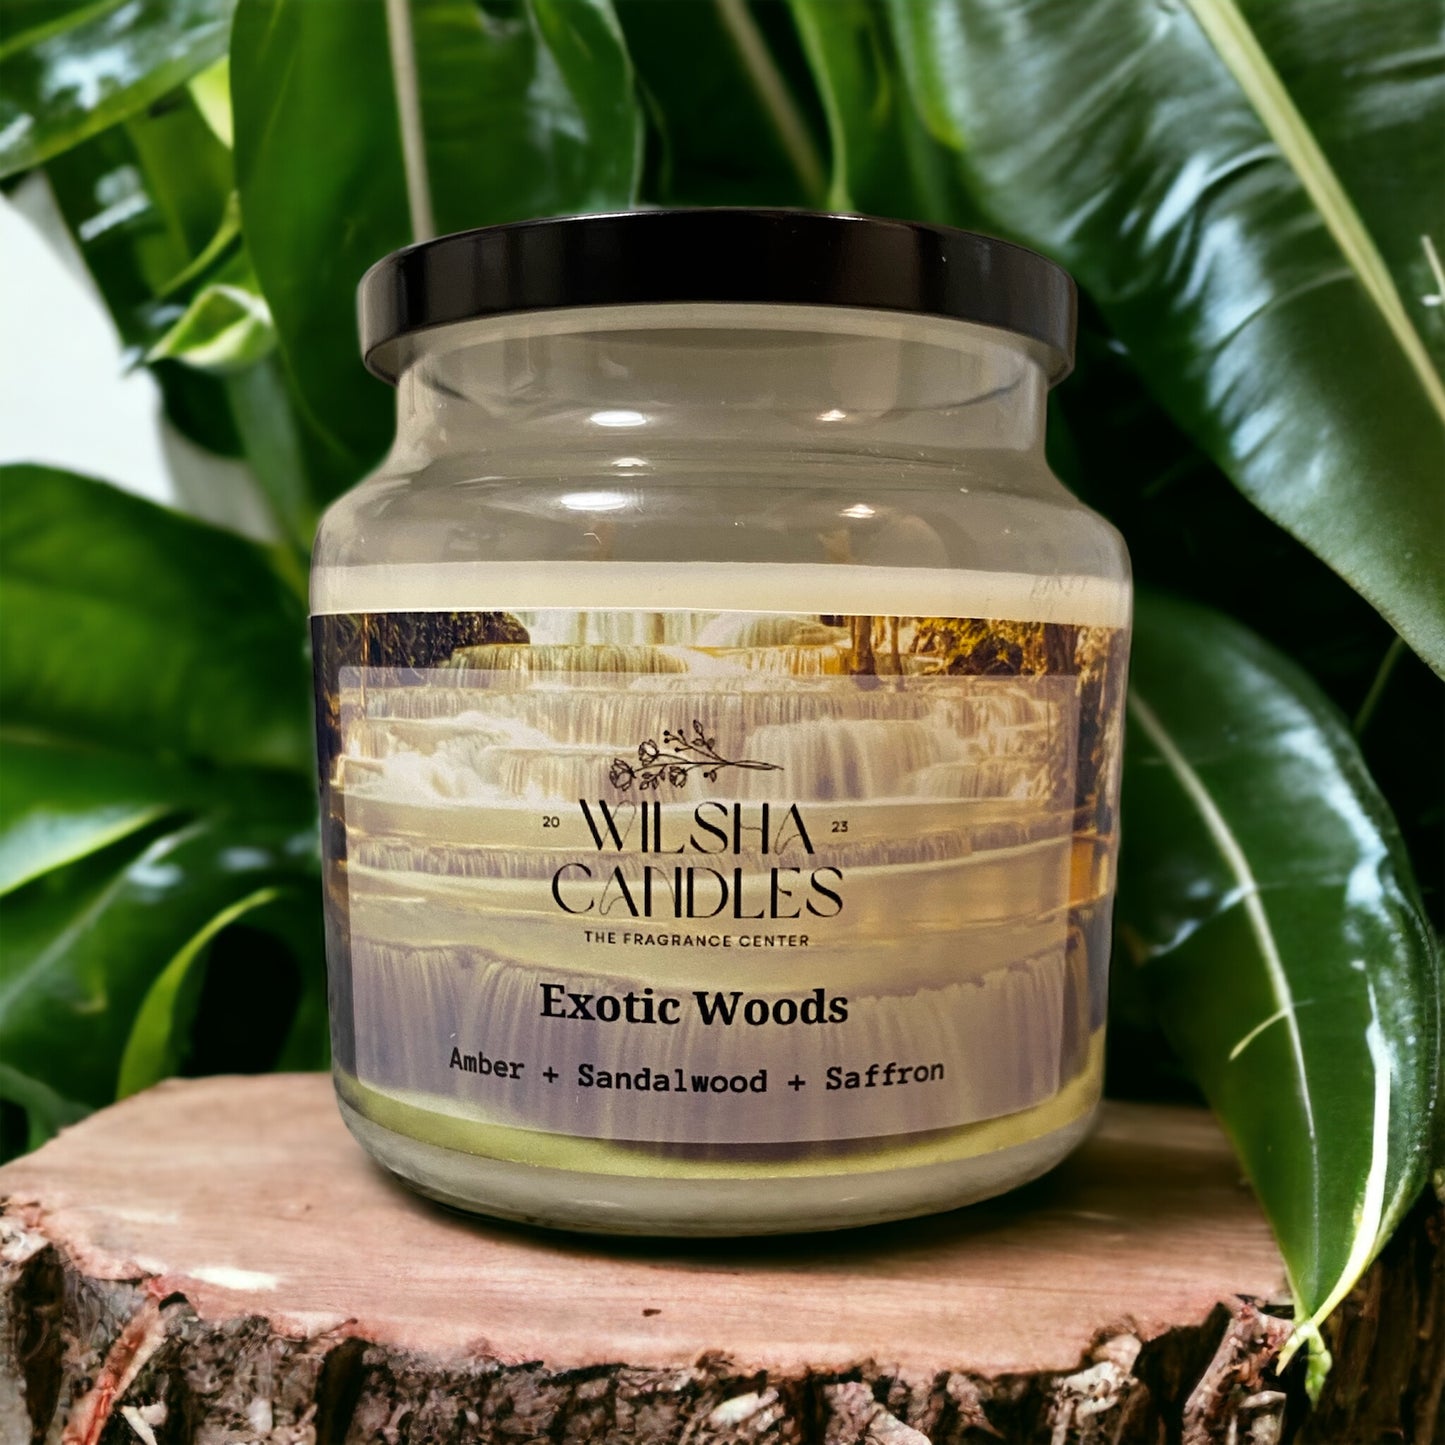 Onex Exotic Woods Hand-Poured High Quality Soy Candle